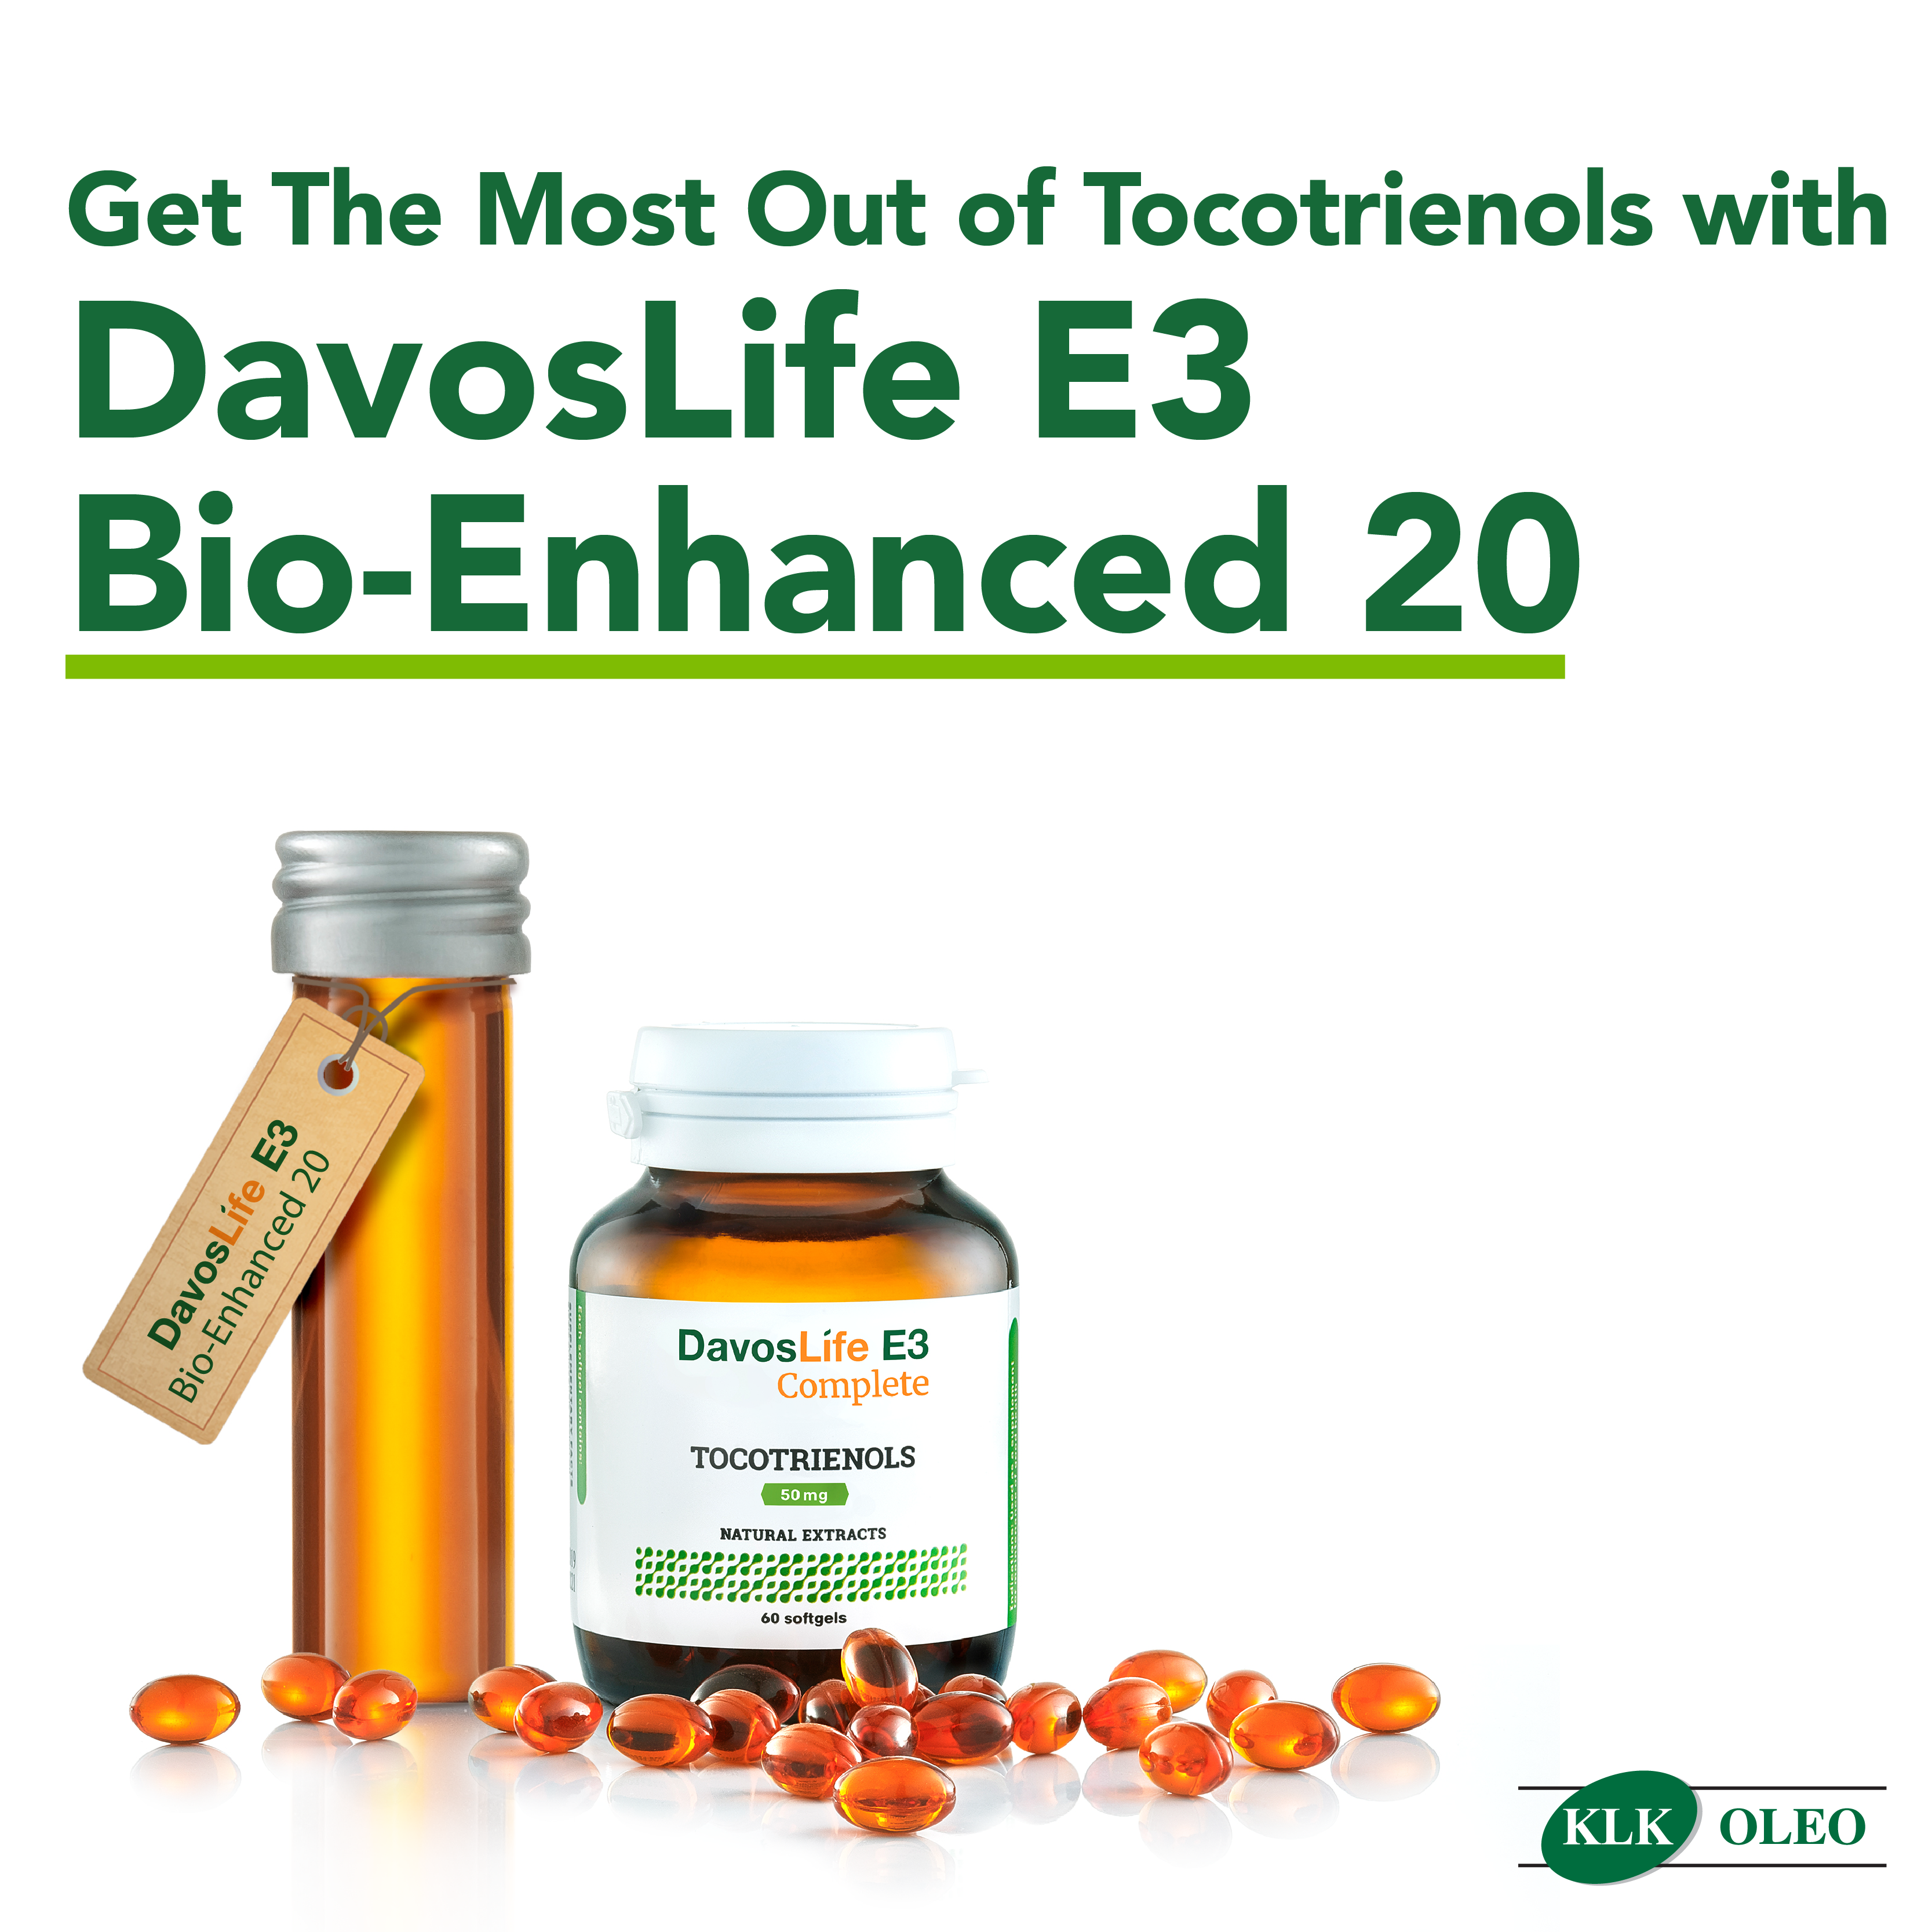 Get The Most Out of Tocotrienols with DavosLife E3 Bio-Enhanced 20